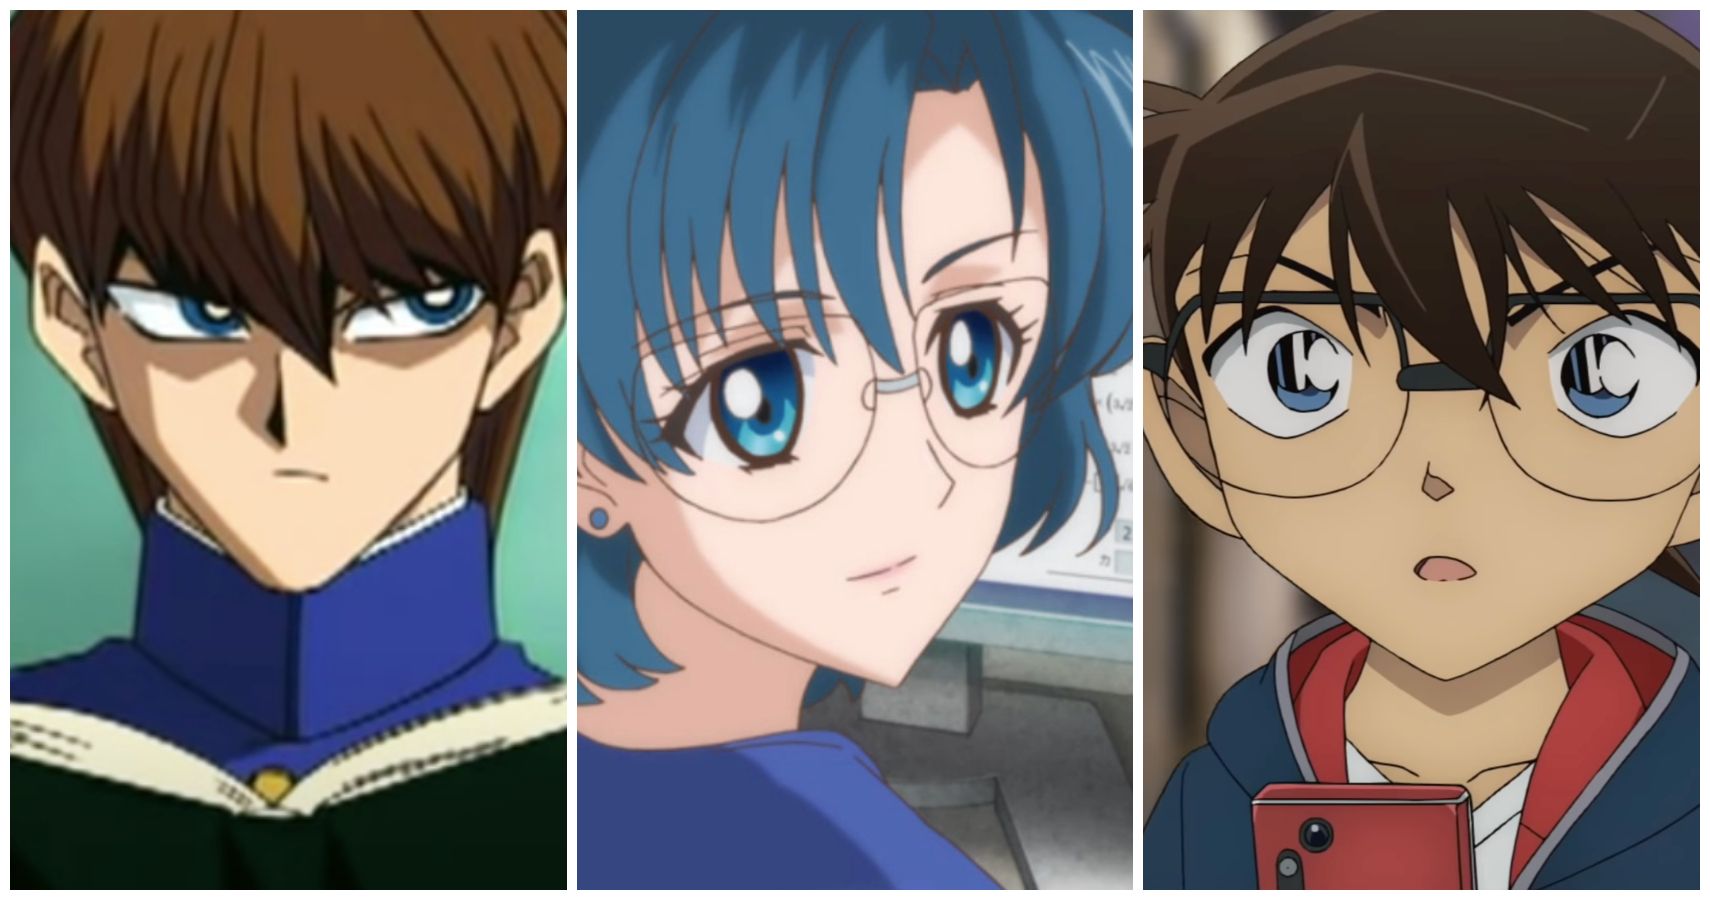 Can you become like the smart characters in the anime, and how? - Quora